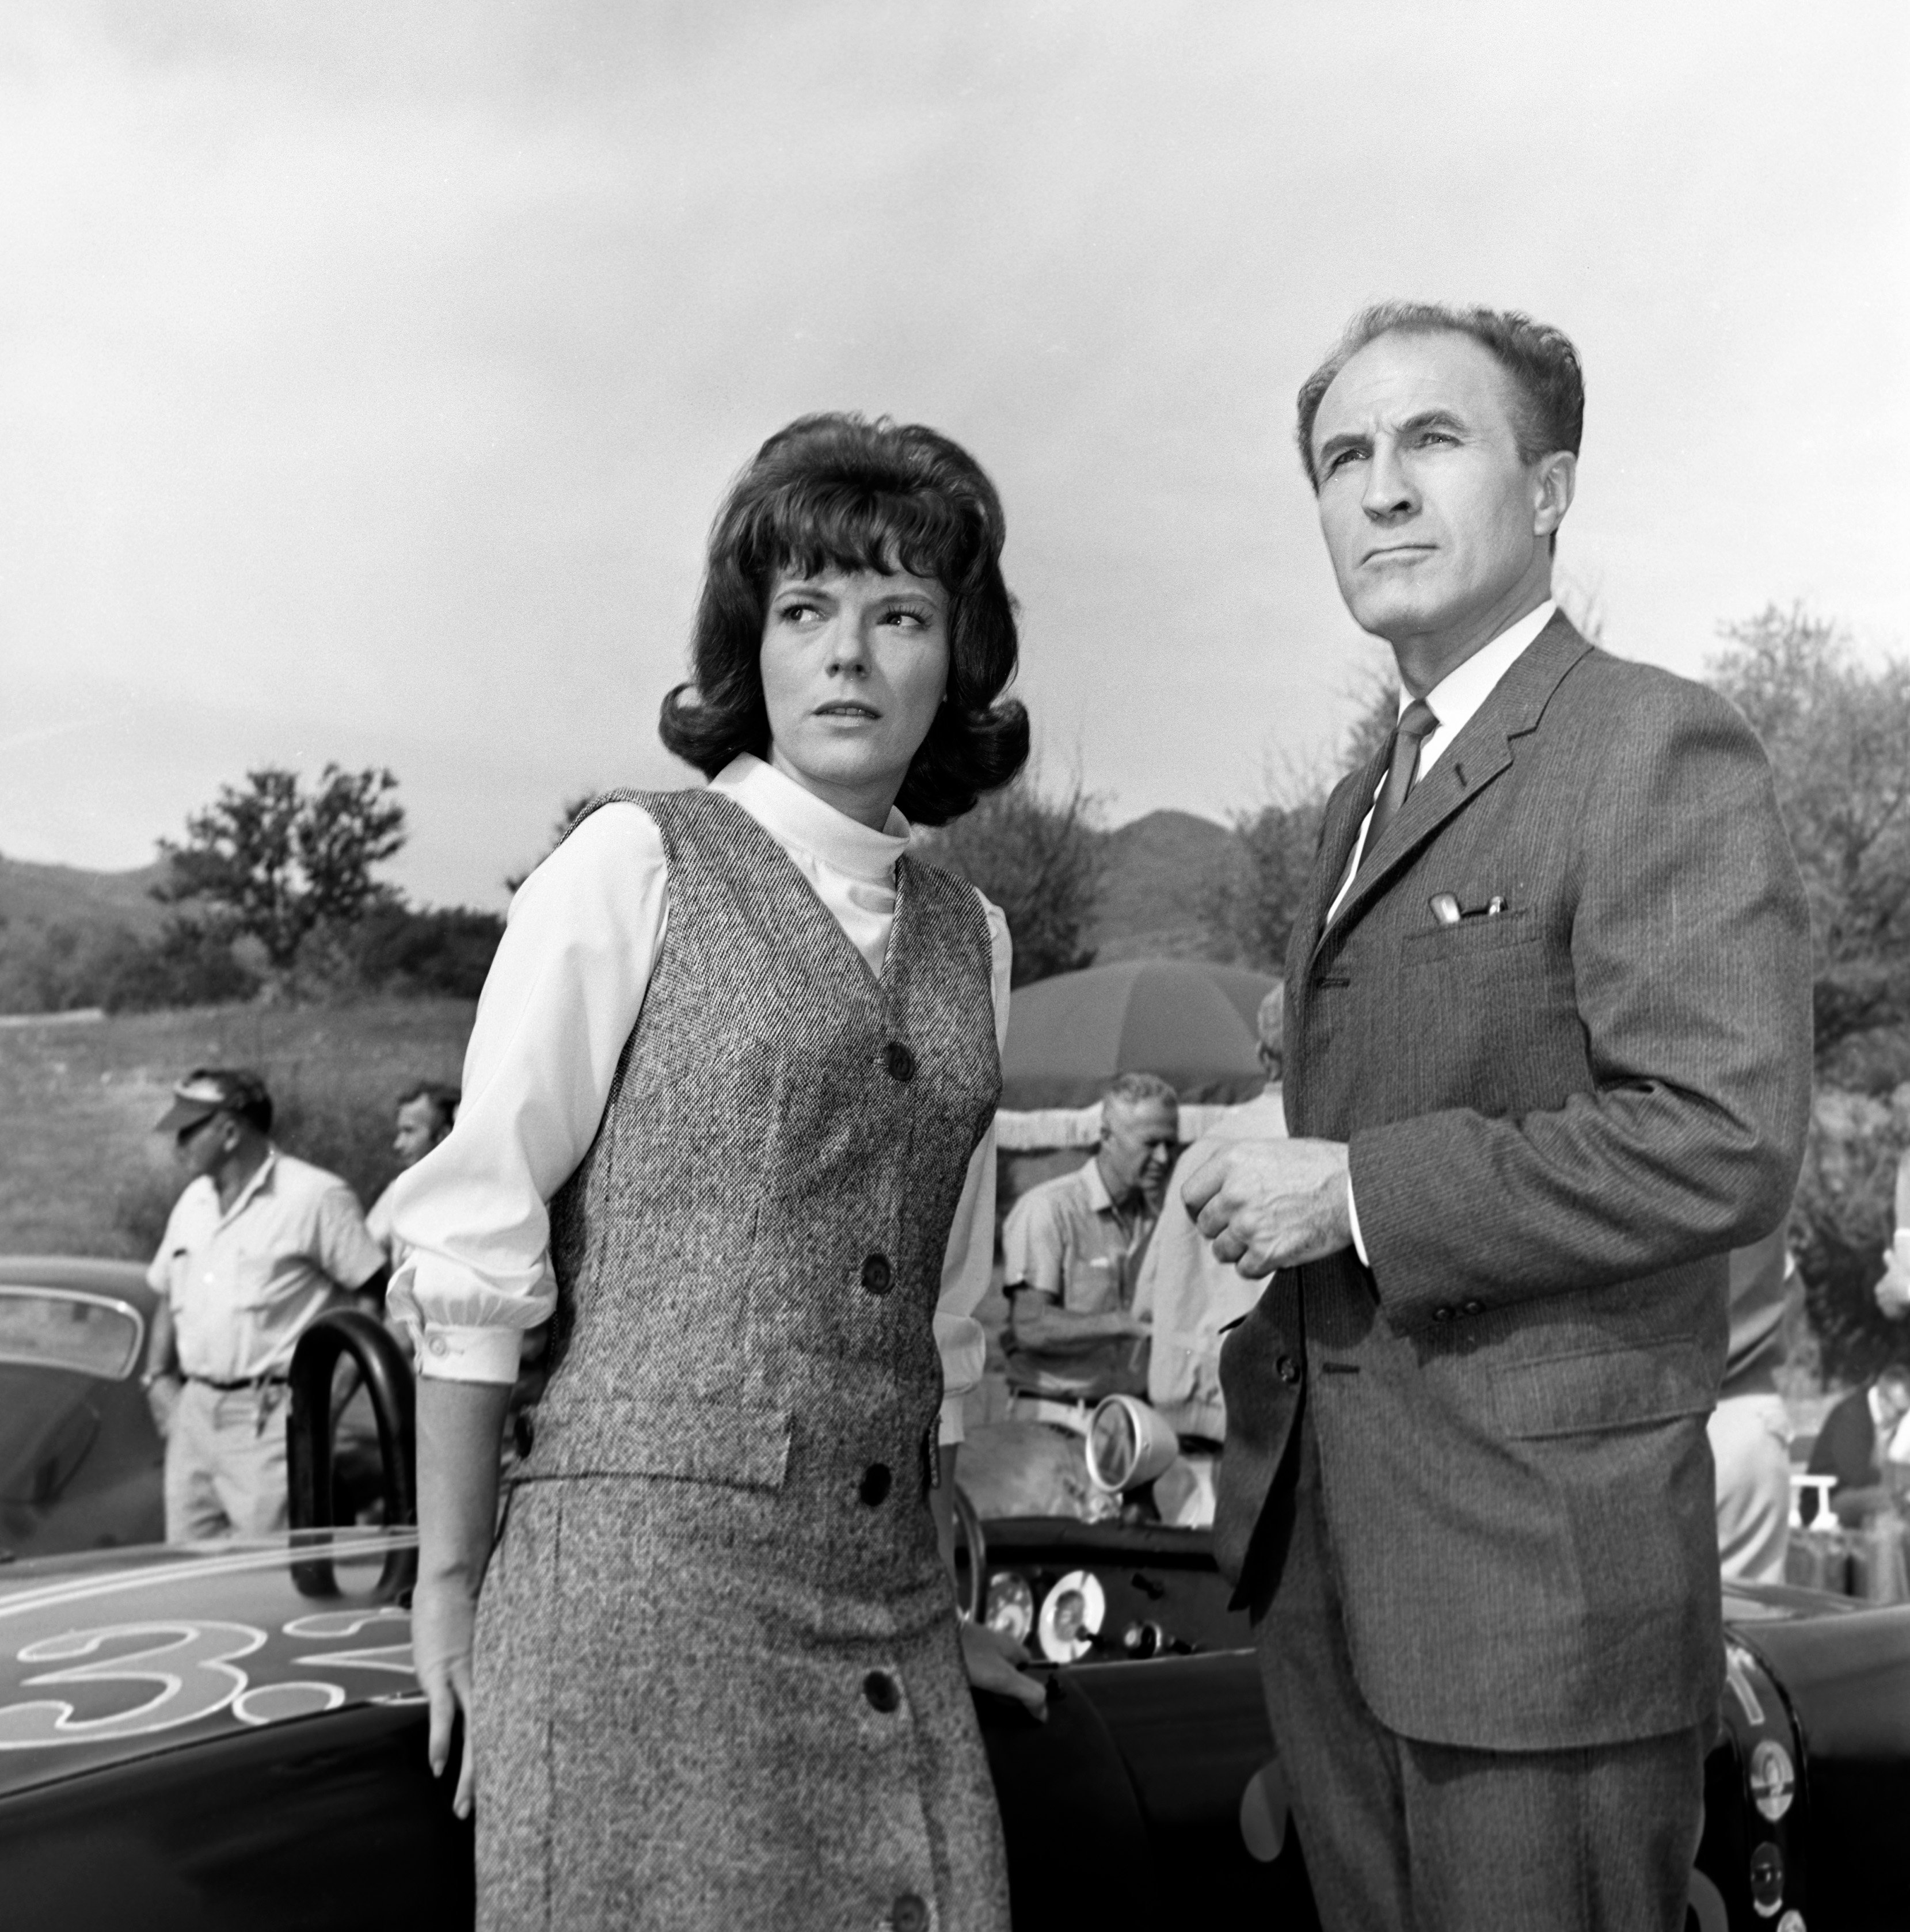 Barry Morse & Jacqueline Scott in "The Fugitive" in 1963. | Source: Getty Images.